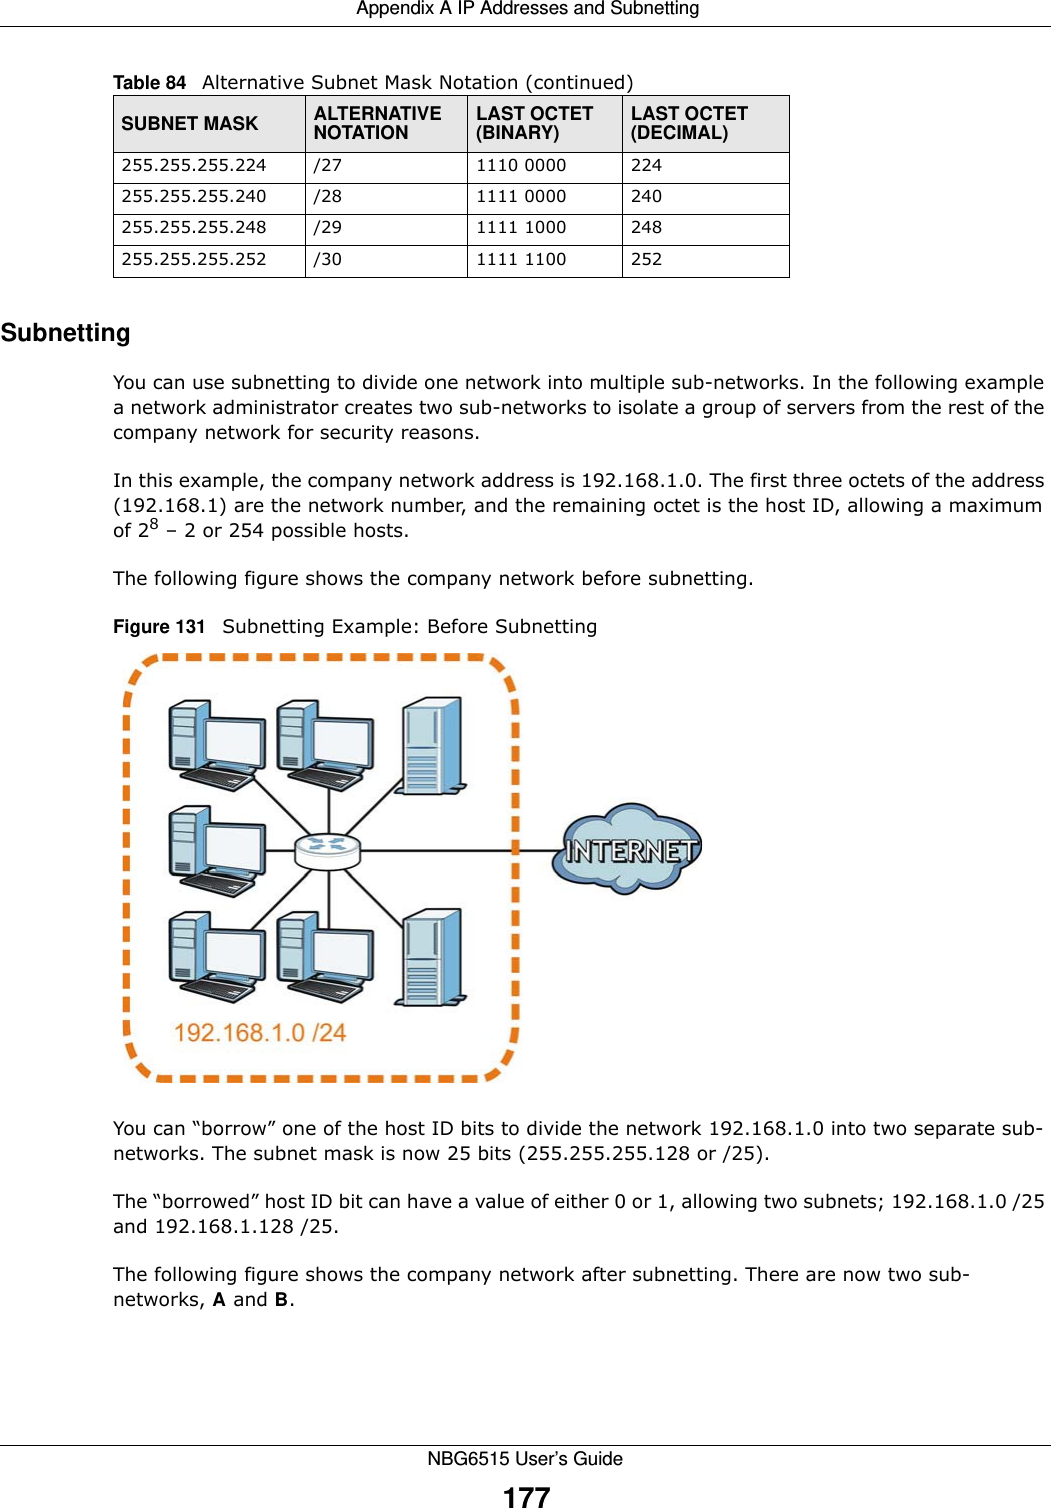  Appendix A IP Addresses and SubnettingNBG6515 User’s Guide177SubnettingYou can use subnetting to divide one network into multiple sub-networks. In the following example a network administrator creates two sub-networks to isolate a group of servers from the rest of the company network for security reasons.In this example, the company network address is 192.168.1.0. The first three octets of the address (192.168.1) are the network number, and the remaining octet is the host ID, allowing a maximum of 28 – 2 or 254 possible hosts.The following figure shows the company network before subnetting.  Figure 131   Subnetting Example: Before SubnettingYou can “borrow” one of the host ID bits to divide the network 192.168.1.0 into two separate sub-networks. The subnet mask is now 25 bits (255.255.255.128 or /25).The “borrowed” host ID bit can have a value of either 0 or 1, allowing two subnets; 192.168.1.0 /25 and 192.168.1.128 /25. The following figure shows the company network after subnetting. There are now two sub-networks, A and B. 255.255.255.224 /27 1110 0000 224255.255.255.240 /28 1111 0000 240255.255.255.248 /29 1111 1000 248255.255.255.252 /30 1111 1100 252Table 84   Alternative Subnet Mask Notation (continued)SUBNET MASK ALTERNATIVE NOTATIONLAST OCTET (BINARY)LAST OCTET (DECIMAL)